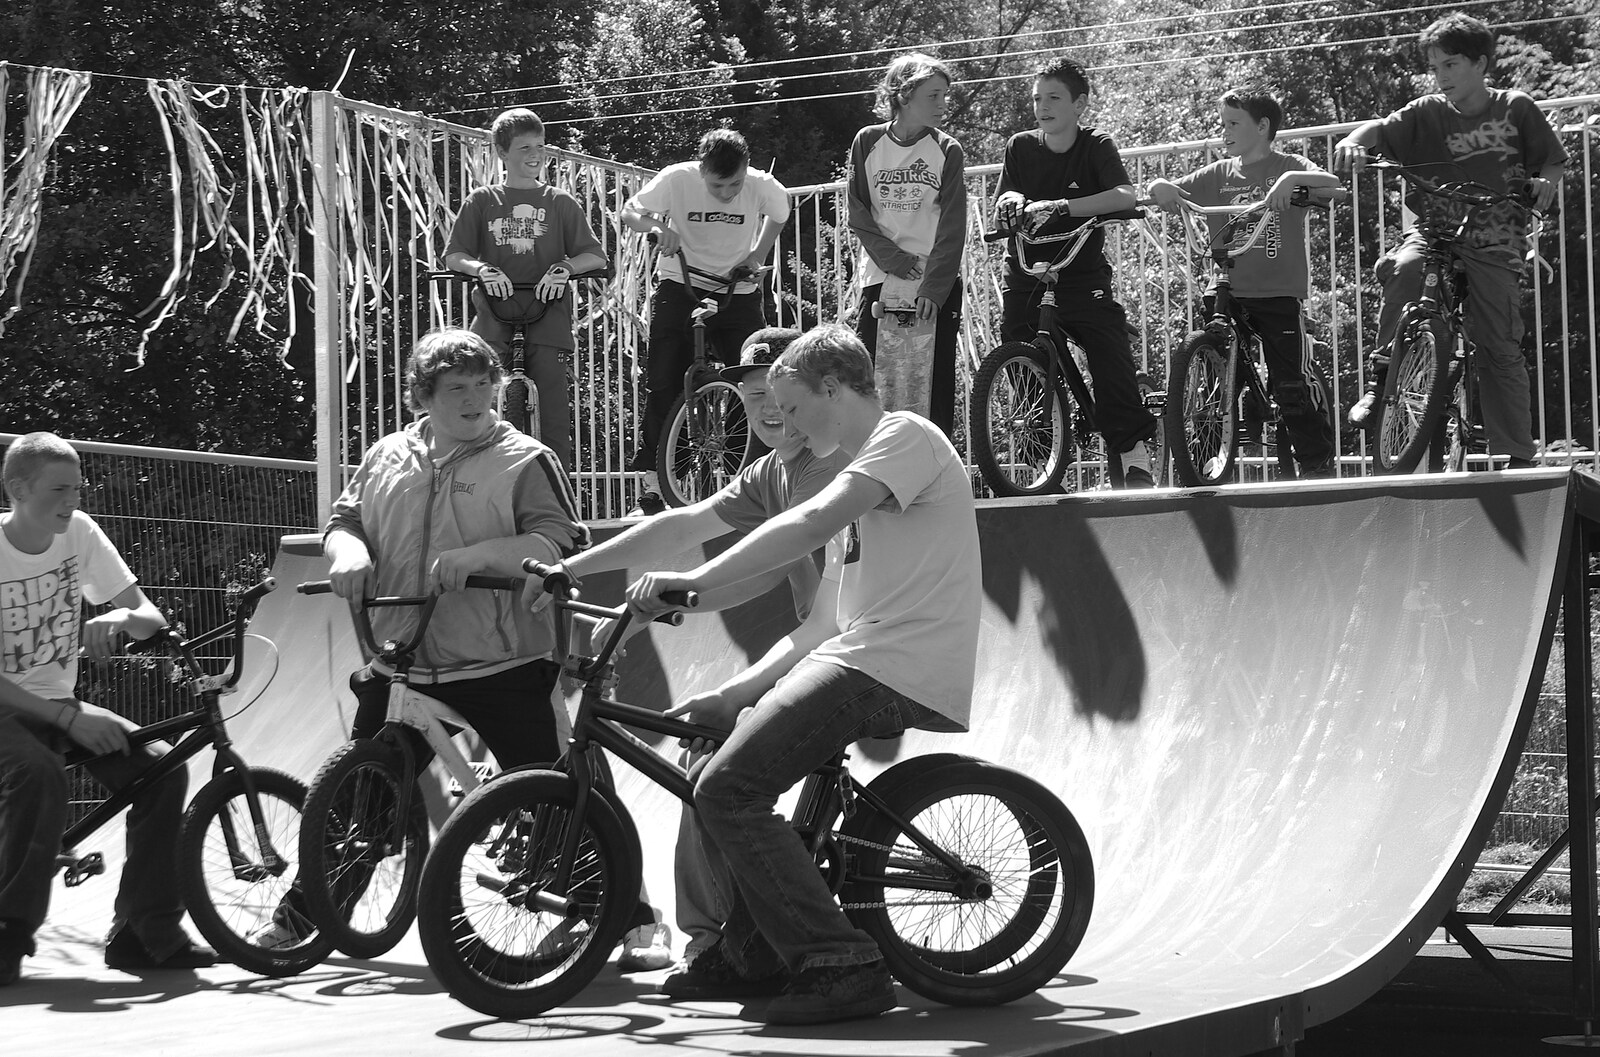 The Opening of Eye Skateboard Park, and The BBs at Cotton, Suffolk - 5th August 2007: A whole group of bikers